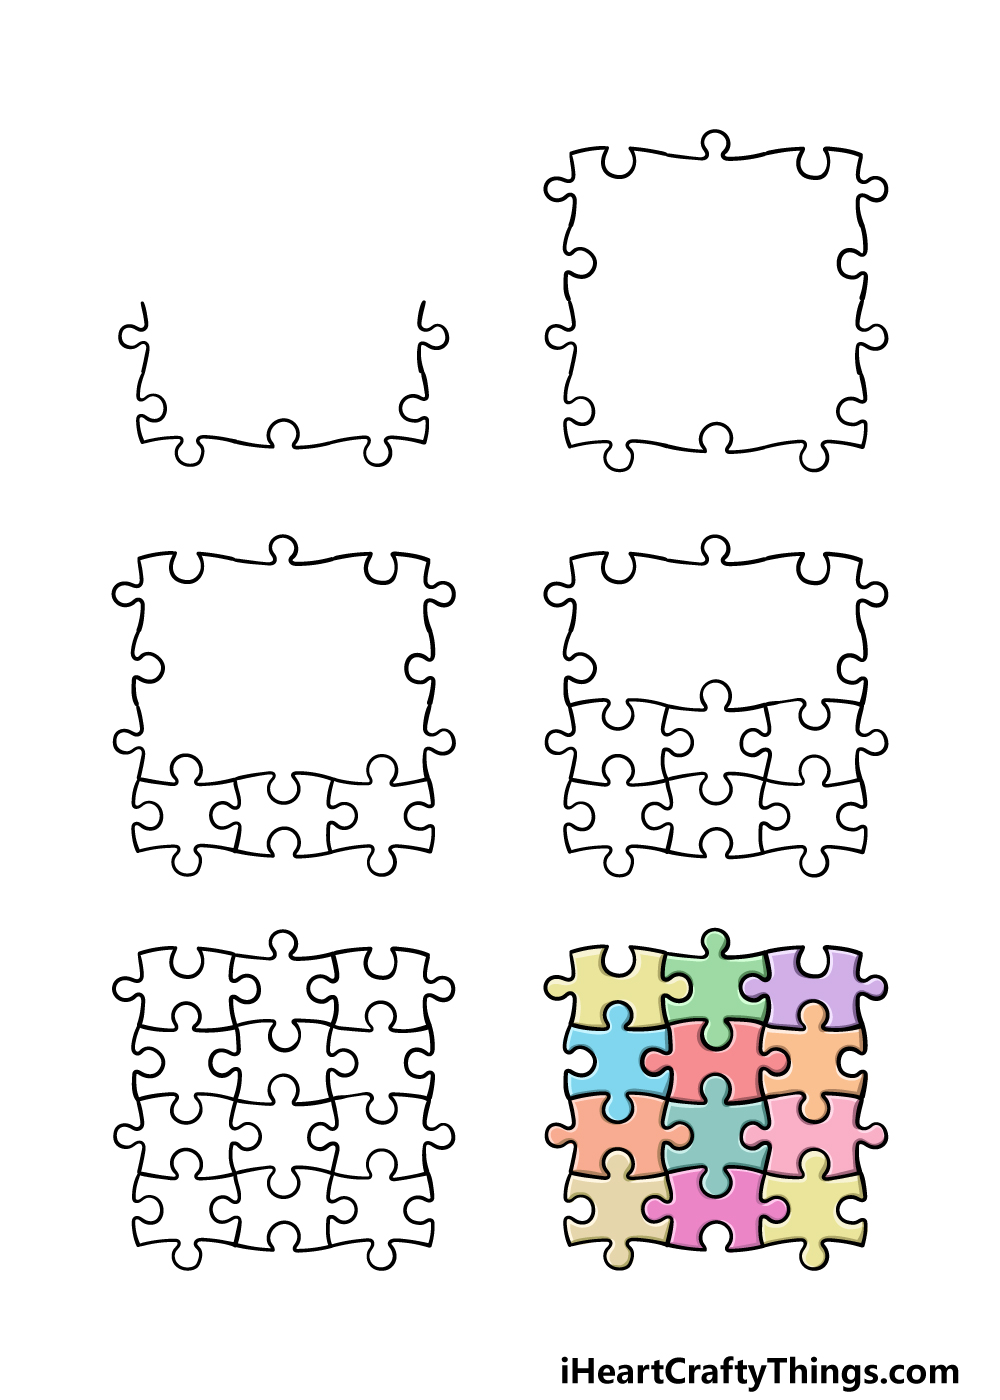 how to draw Puzzle Pieces in 6 steps